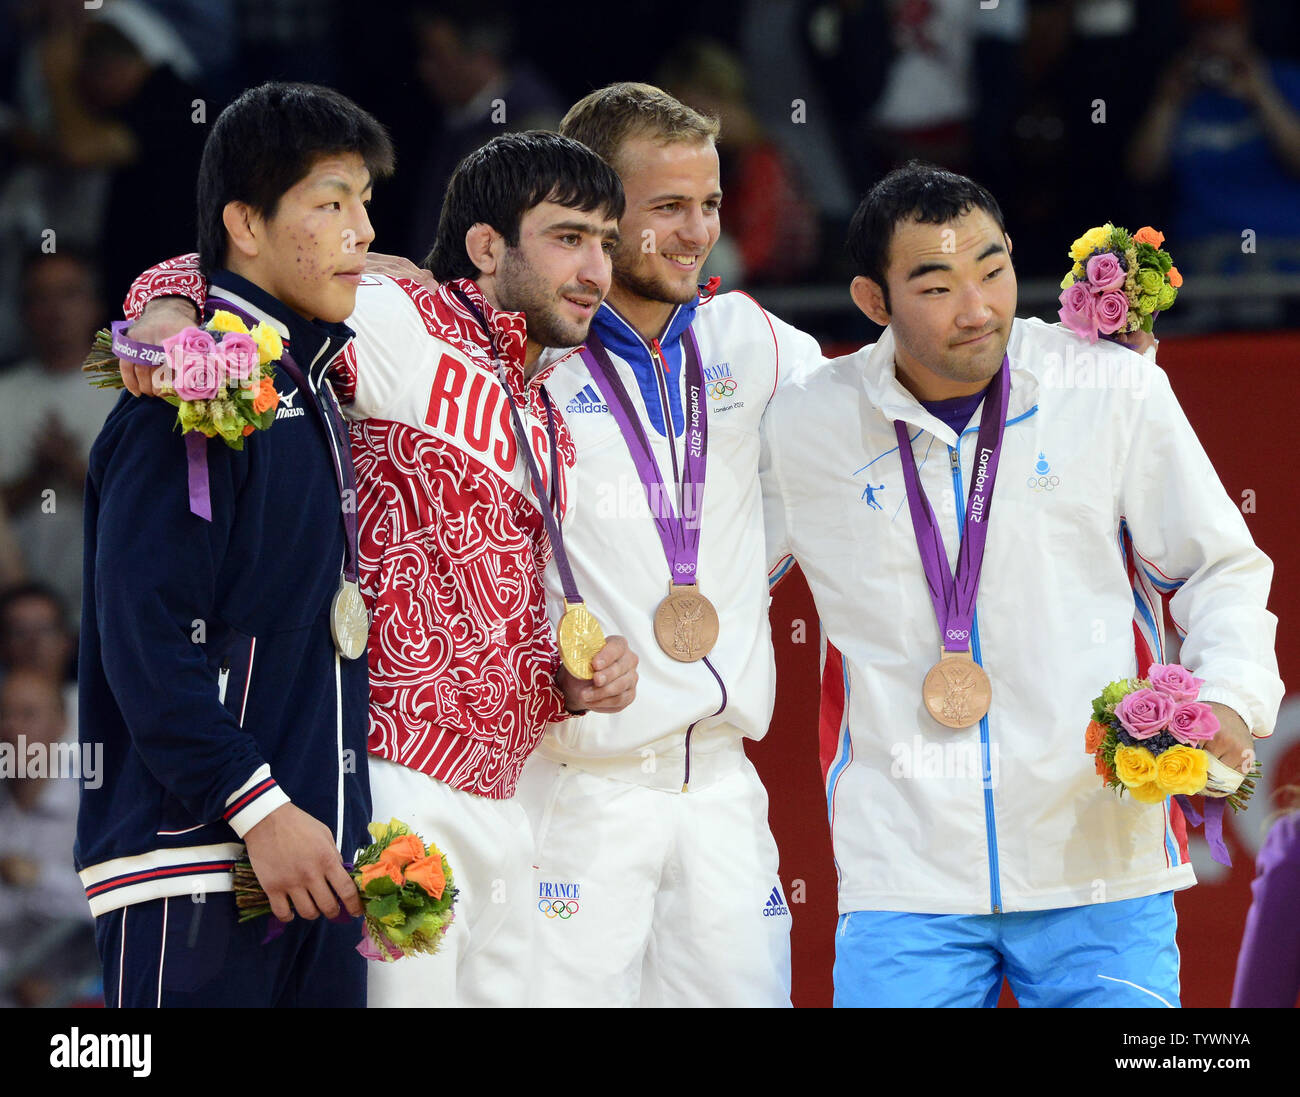 Men's Judo 73kg medal winners at the London 2012 Summer Olympics on July 30, 2012 in London. From left to right: Riki Nakaya of Japan, Silver Medal; Mansur Isaev of Russia, Gold Medal; Ugo LeGrand of France, Bronze Medal; and Nyam-Ochir Sainjargal of Mongolia, Bronze Medal.  UPI/Ron Sachs Stock Photo